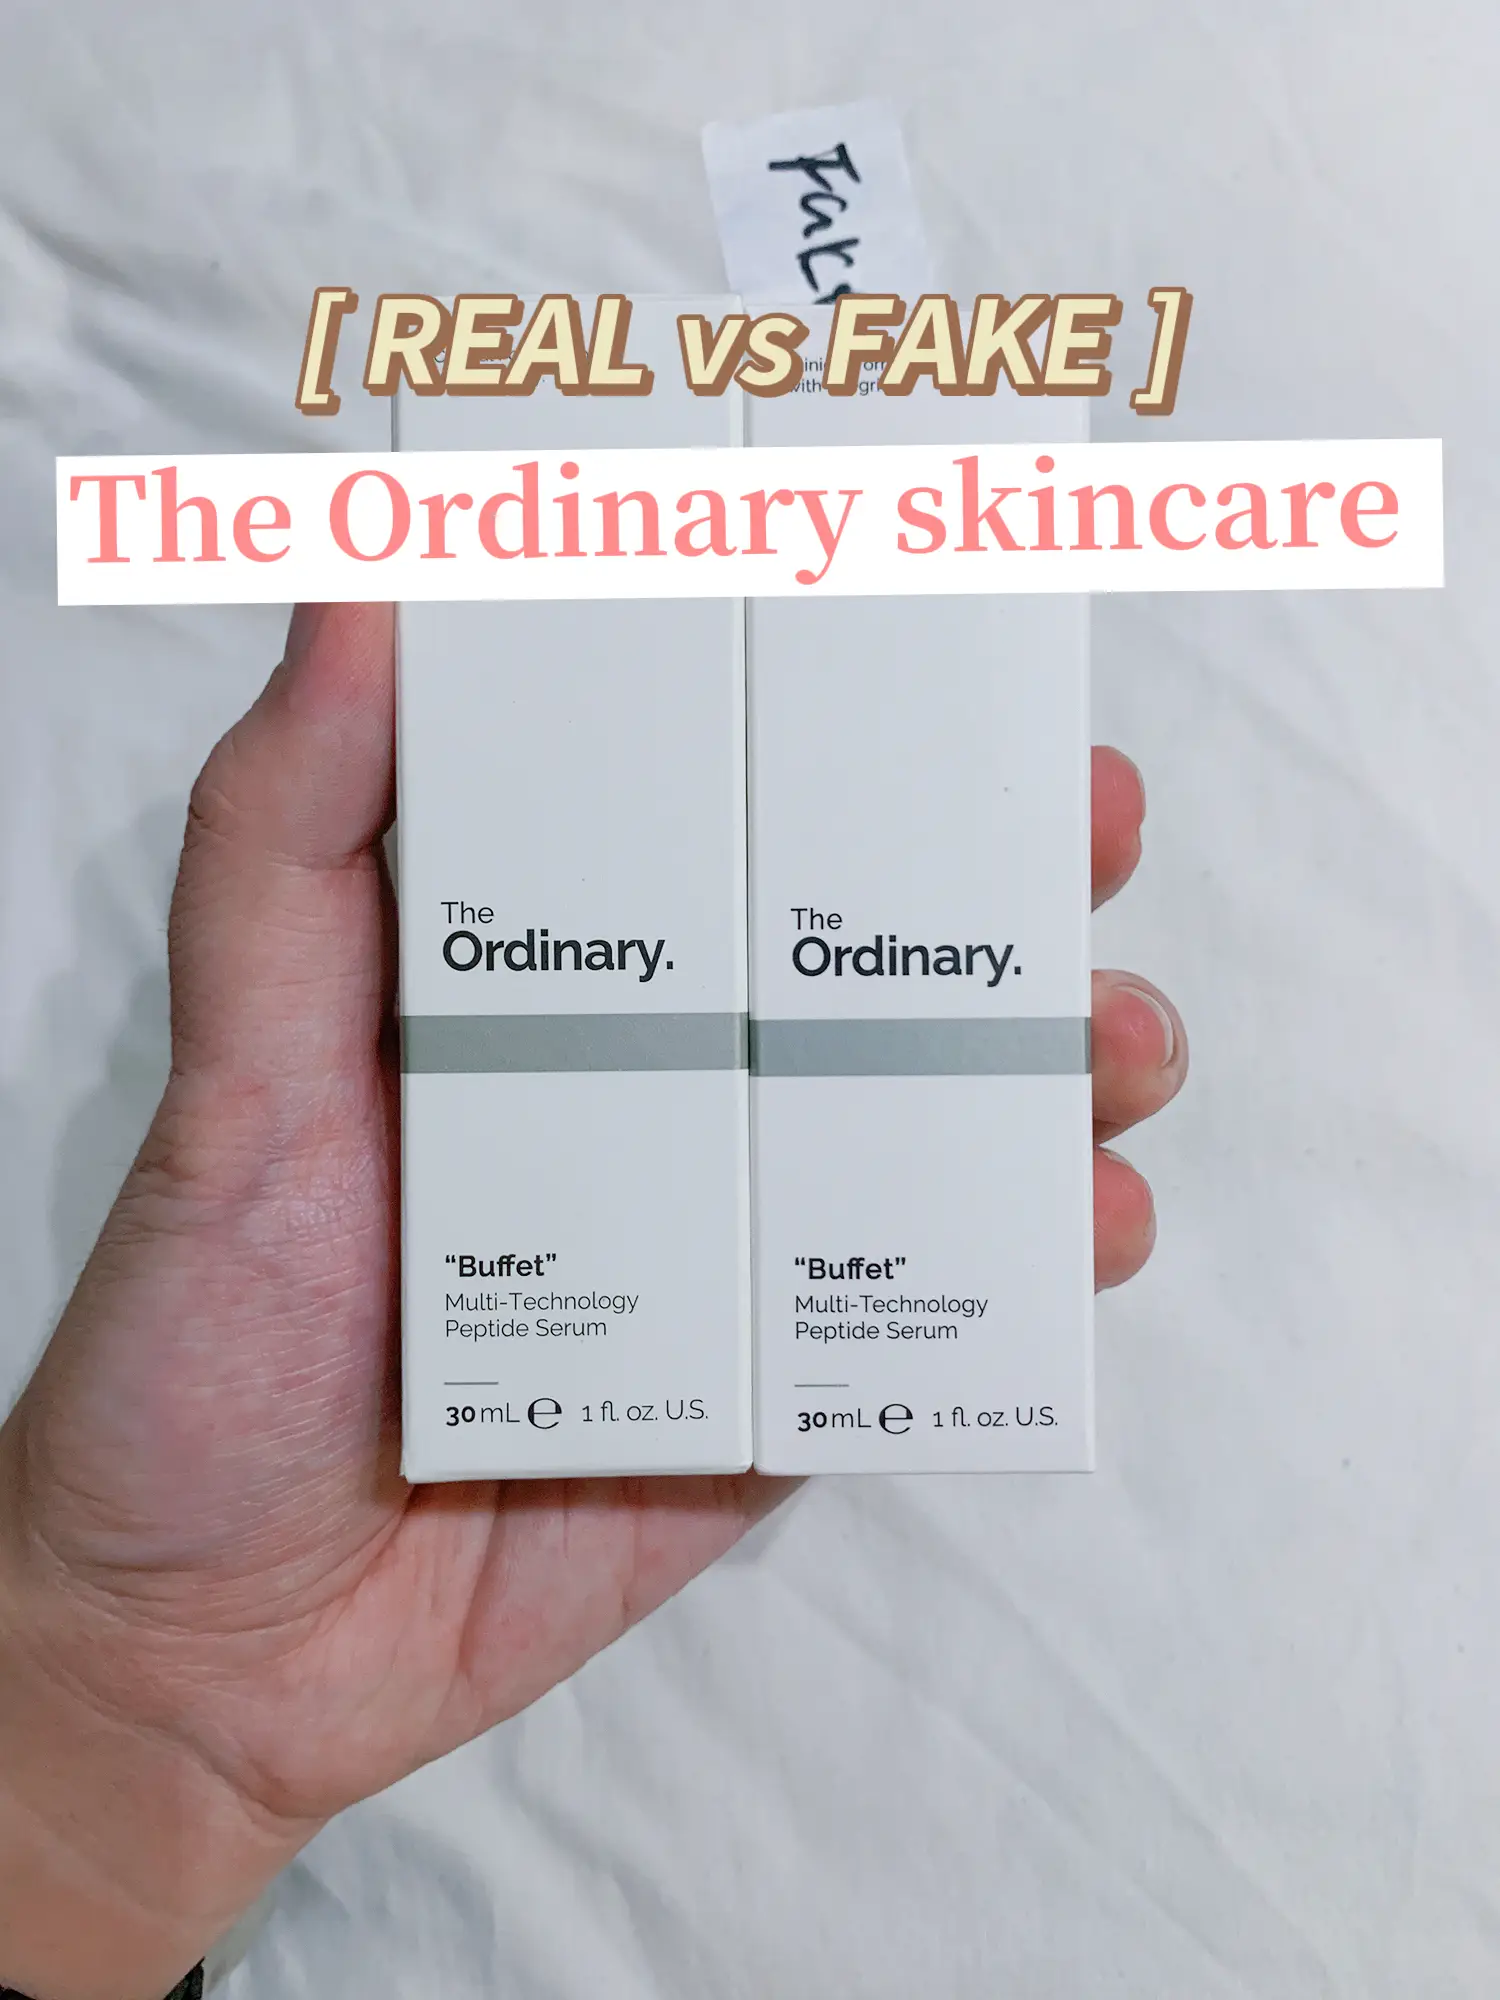 REAL vs FAKE THE ORDINARY: How to differentiate?